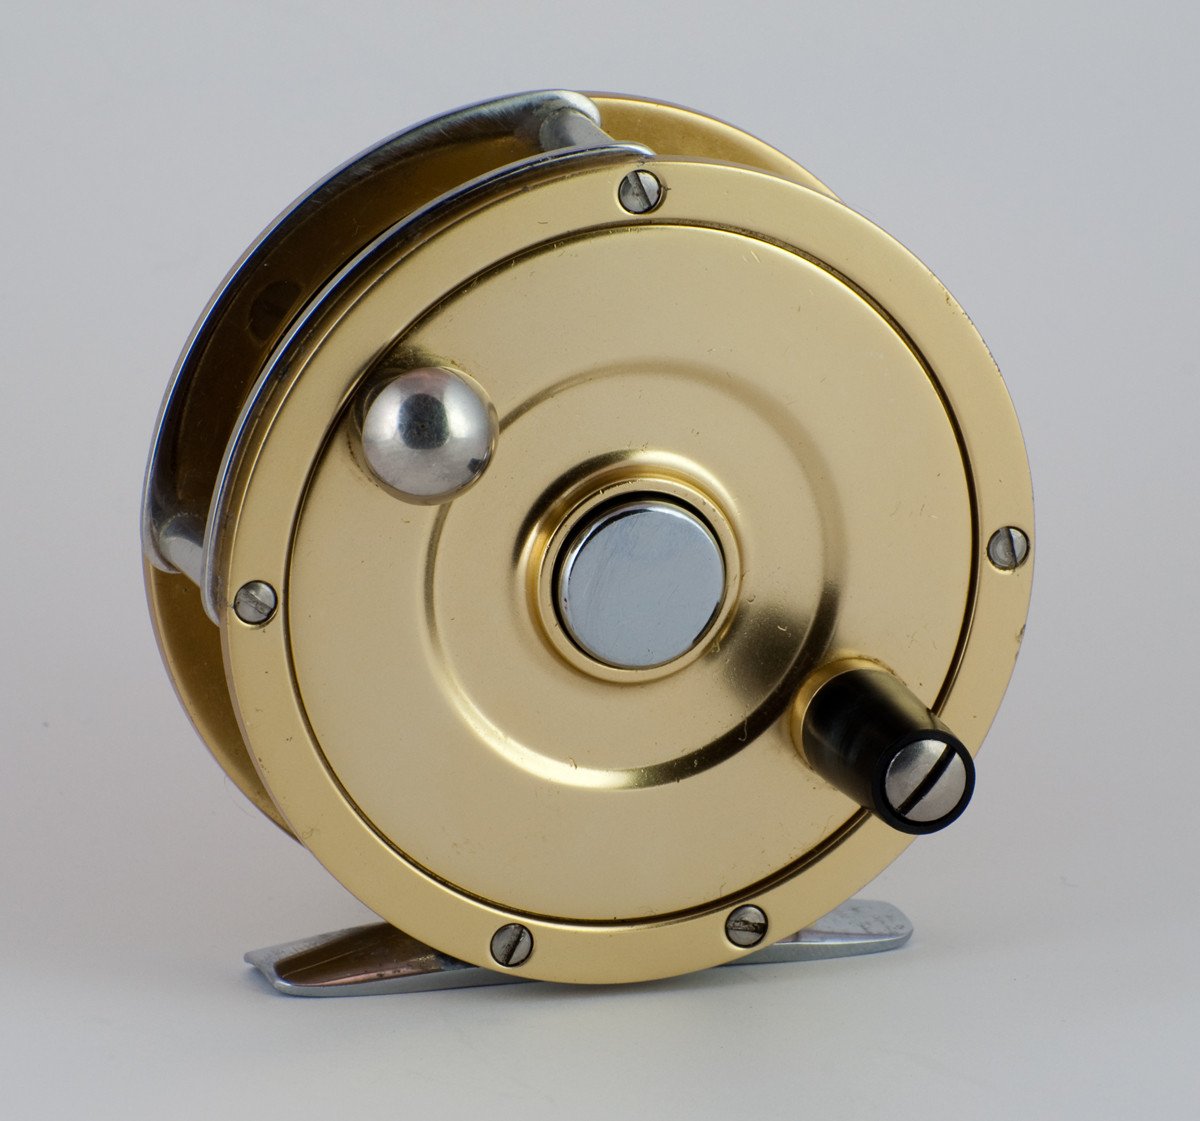 A Fin-nor #2 Fly Reel, Standard Series (Pre-owned) – Ireland's